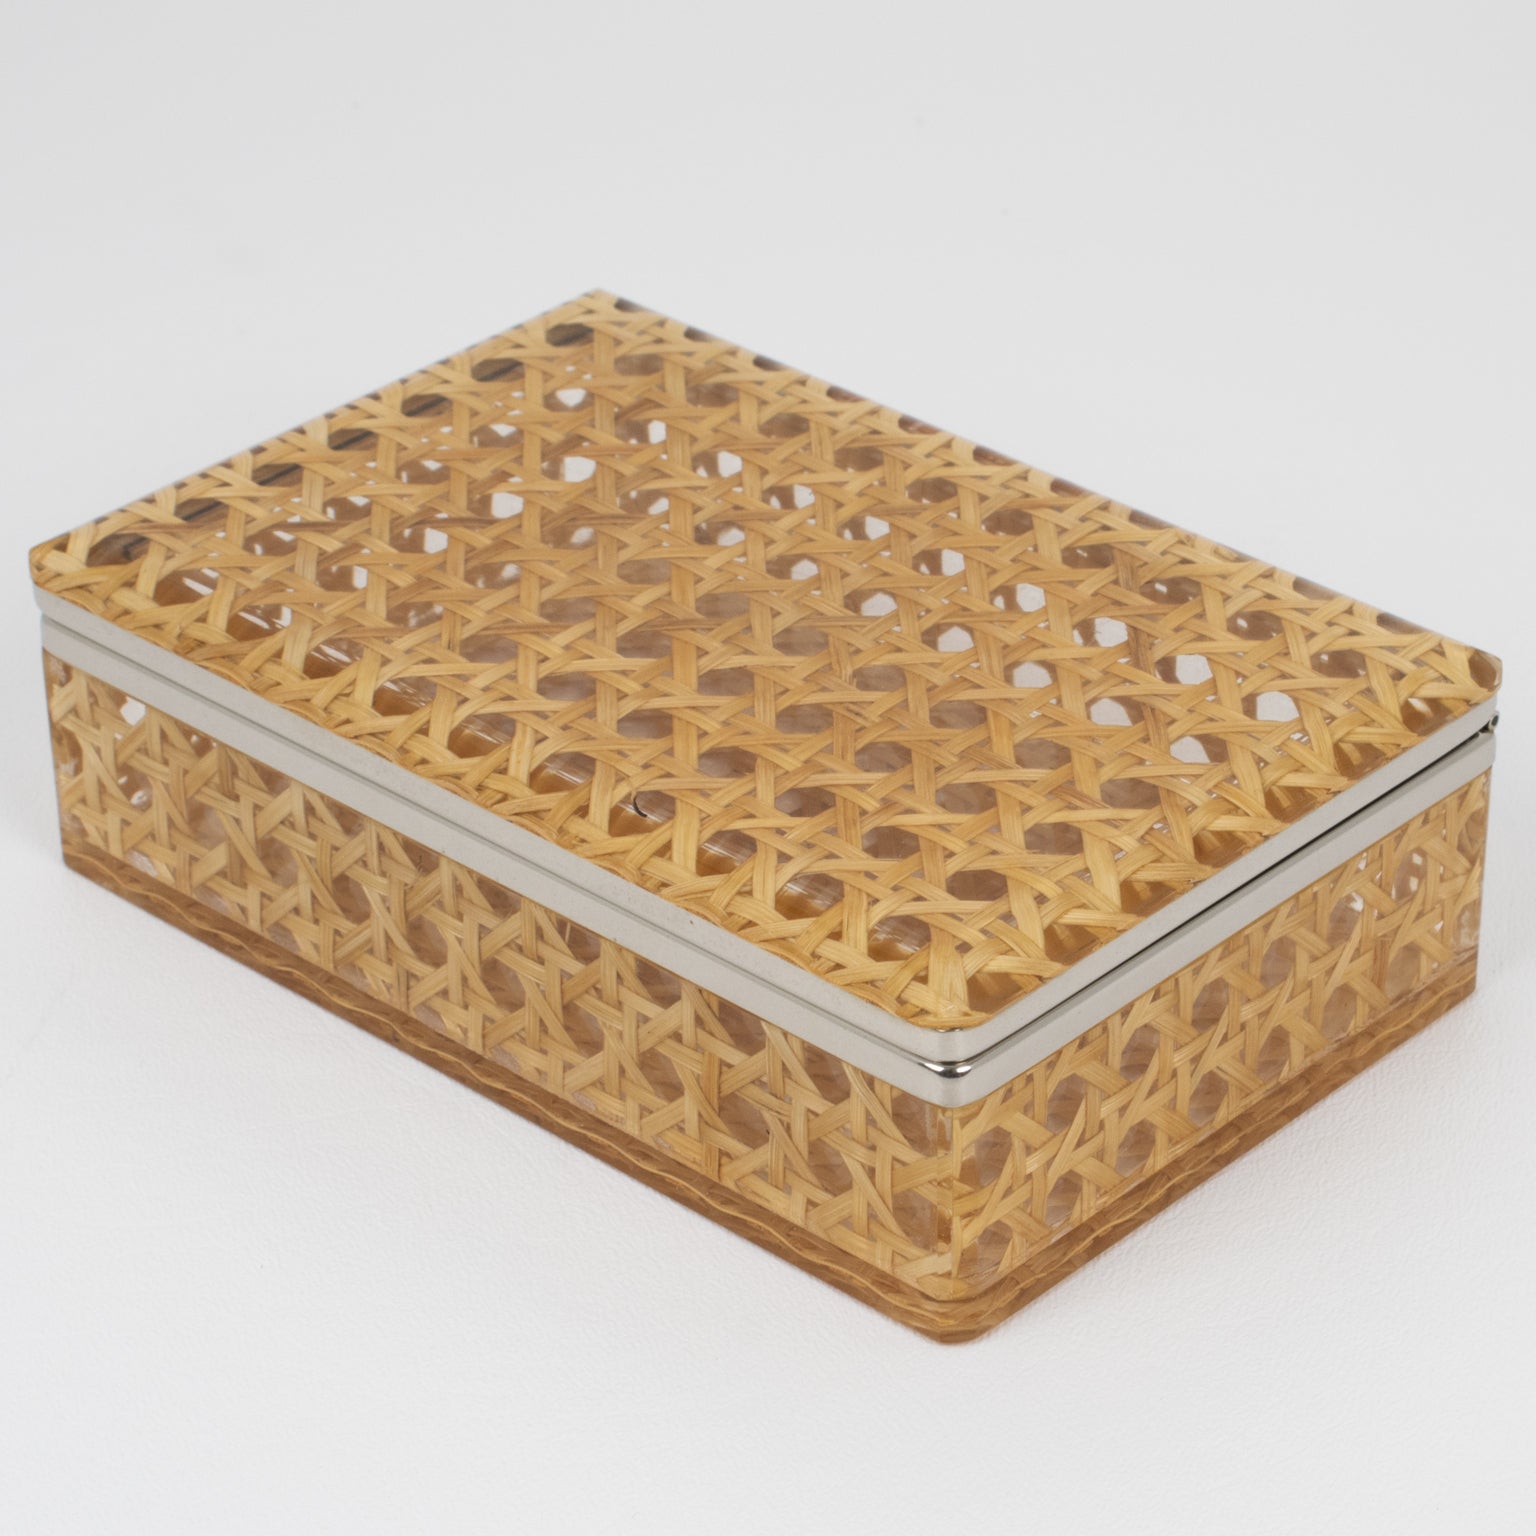 This lovely decorative hinged box is perfect for a living space or vanity. The chrome-plated framing is complemented with clear Lucite and rattan or wicker cane work. The rattan is embedded within two thick sheets of clear Lucite or acrylic material